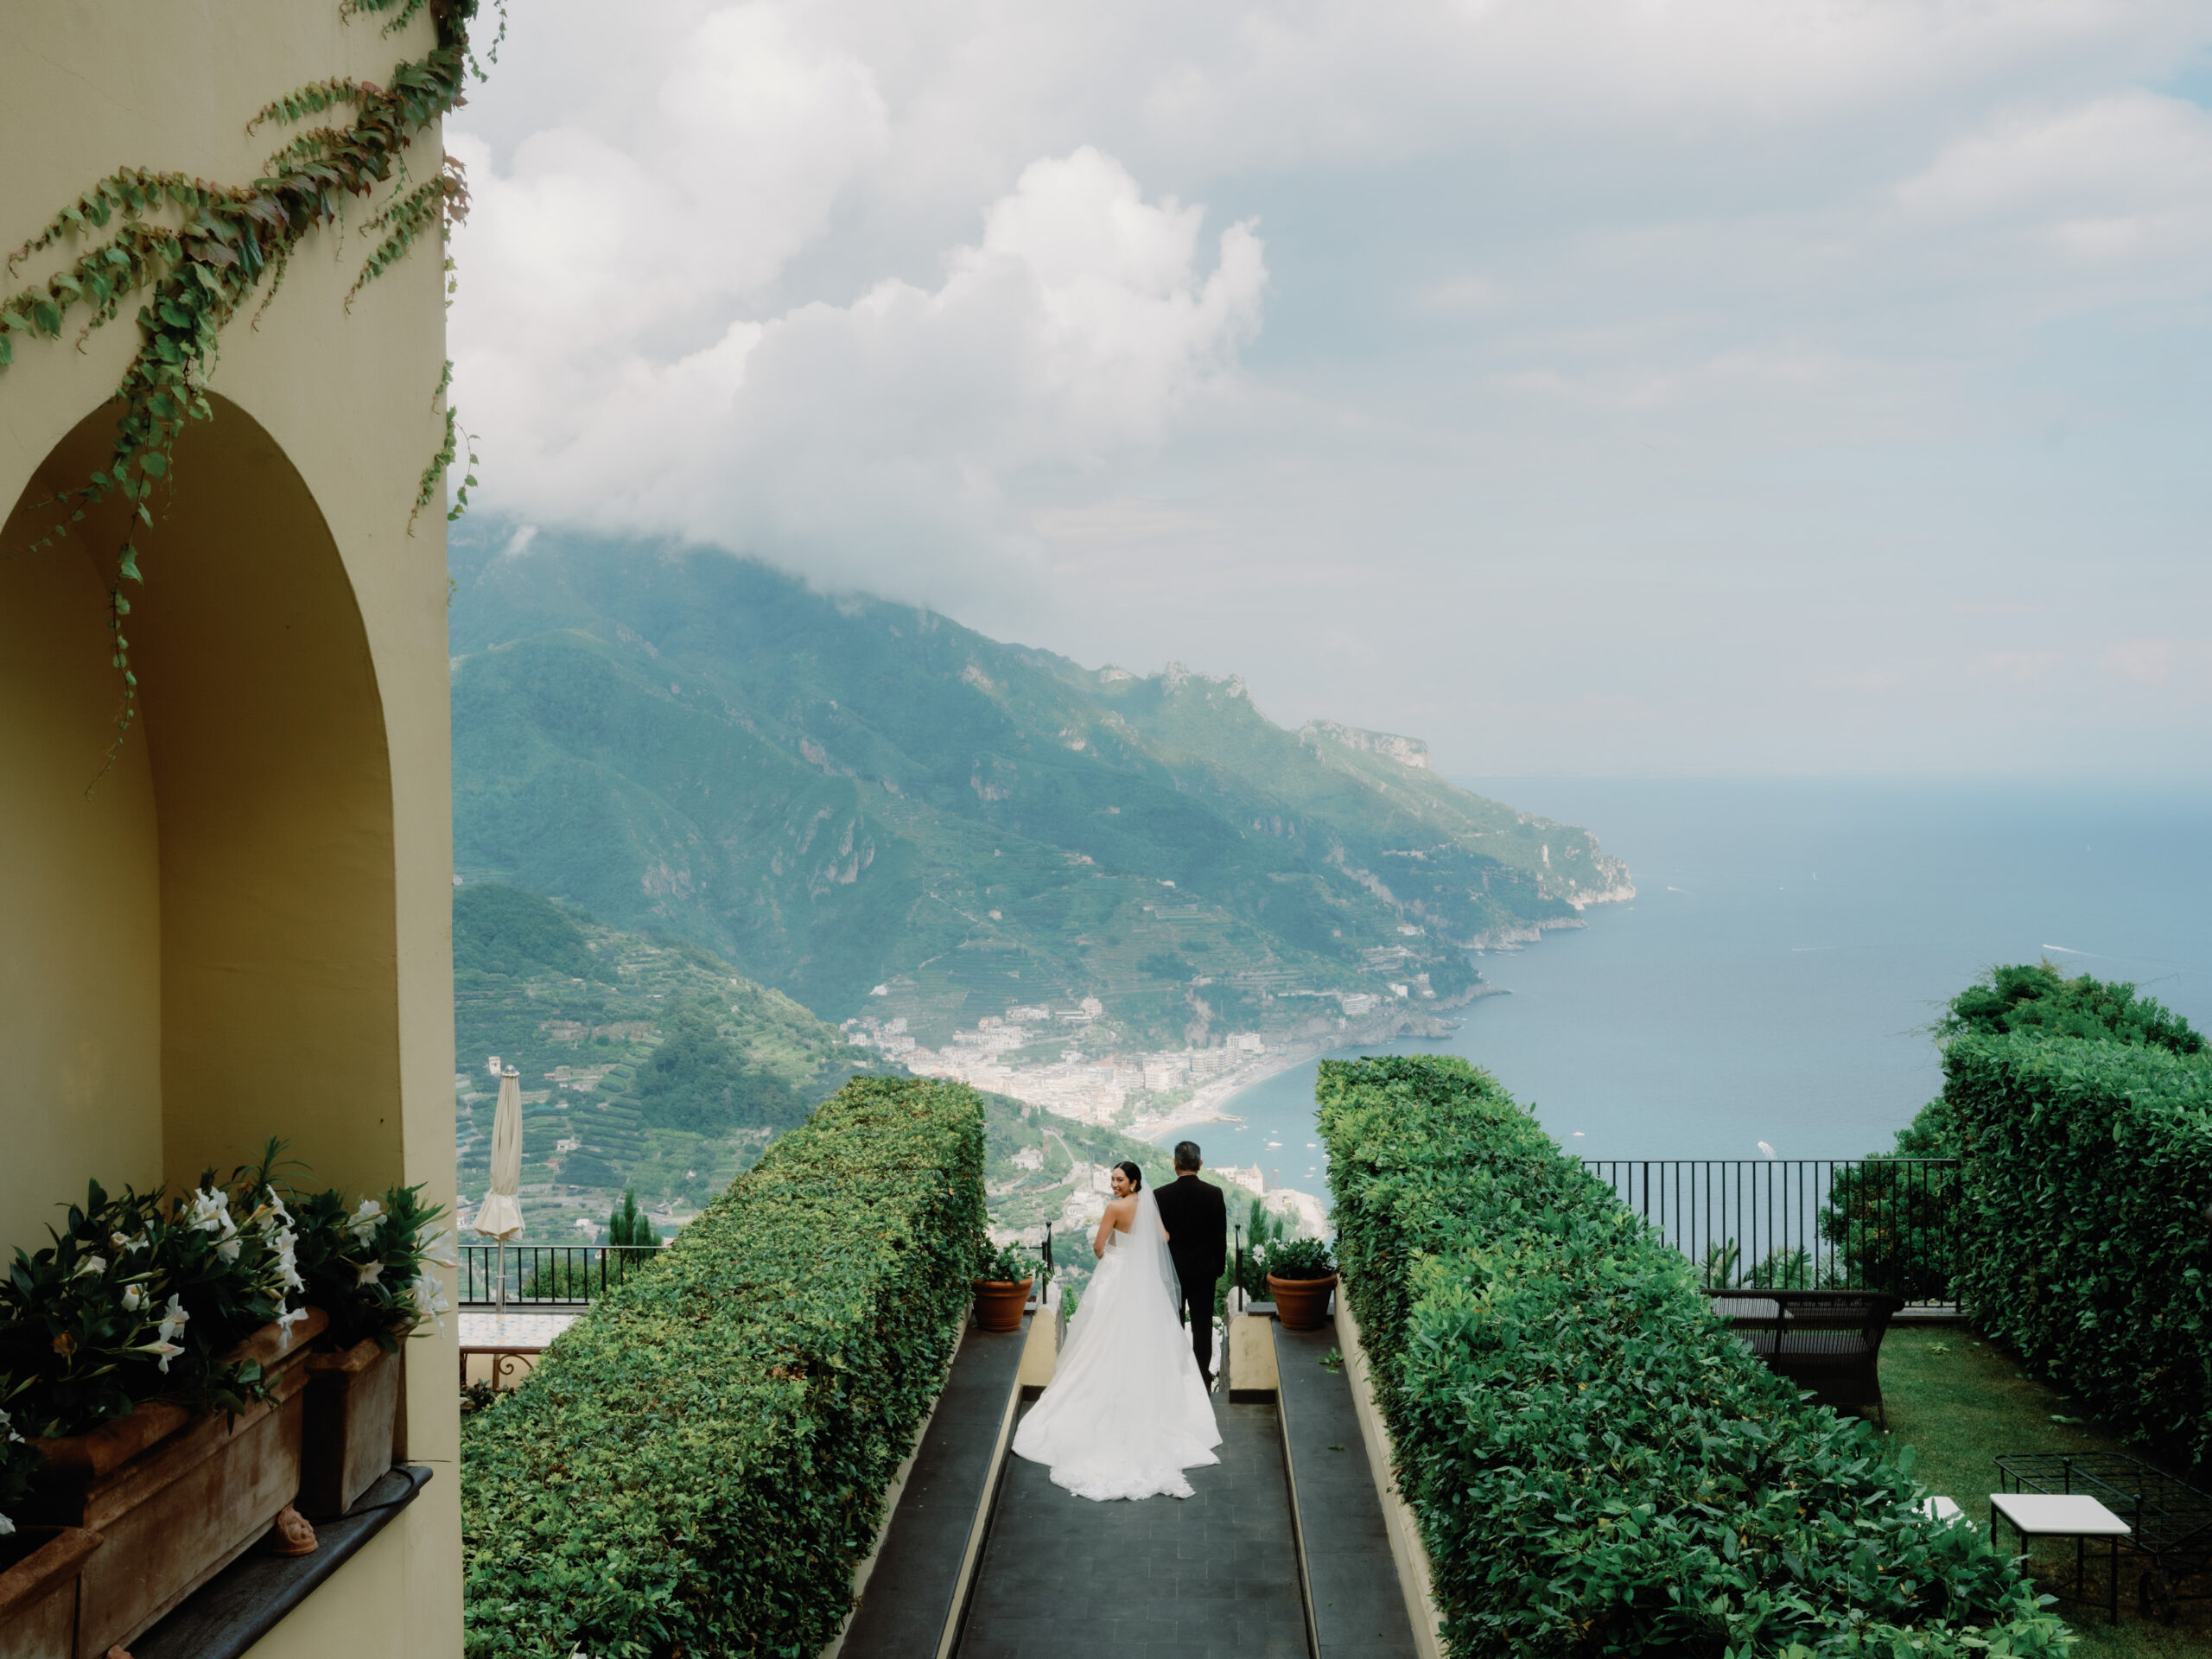 Breathtaking moment as the bride walks down to her wedding ceremony in Ravello, Italy, overlooking the stunning Amalfi Coast. The majestic backdrop features the iconic Caruso, a Belmond Hotel, creating a picture-perfect scene for this unforgettable day.